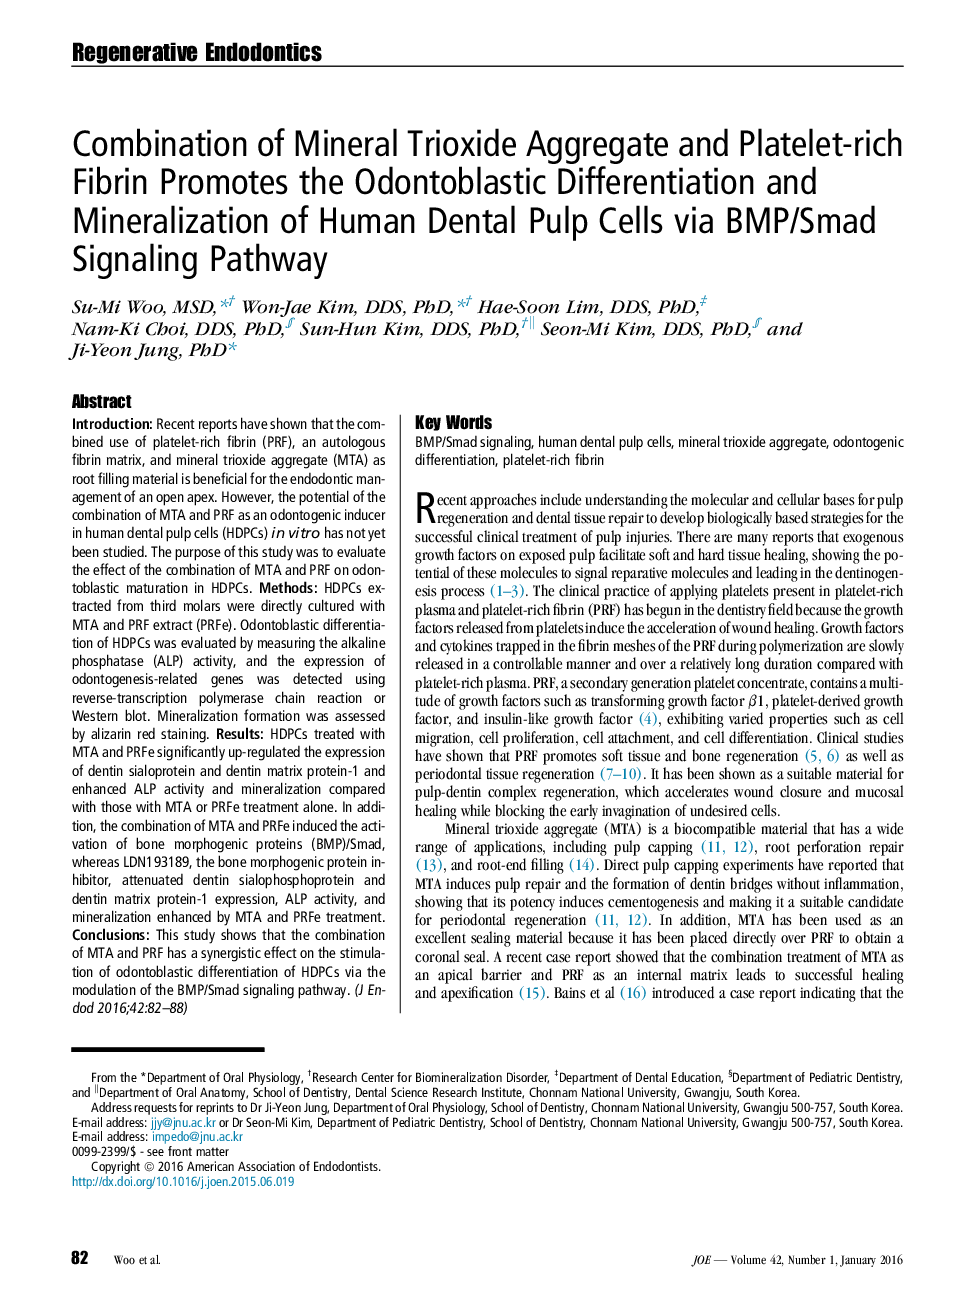 Combination of Mineral Trioxide Aggregate and Platelet-rich Fibrin Promotes the Odontoblastic Differentiation and Mineralization of Human Dental Pulp Cells via BMP/Smad Signaling Pathway